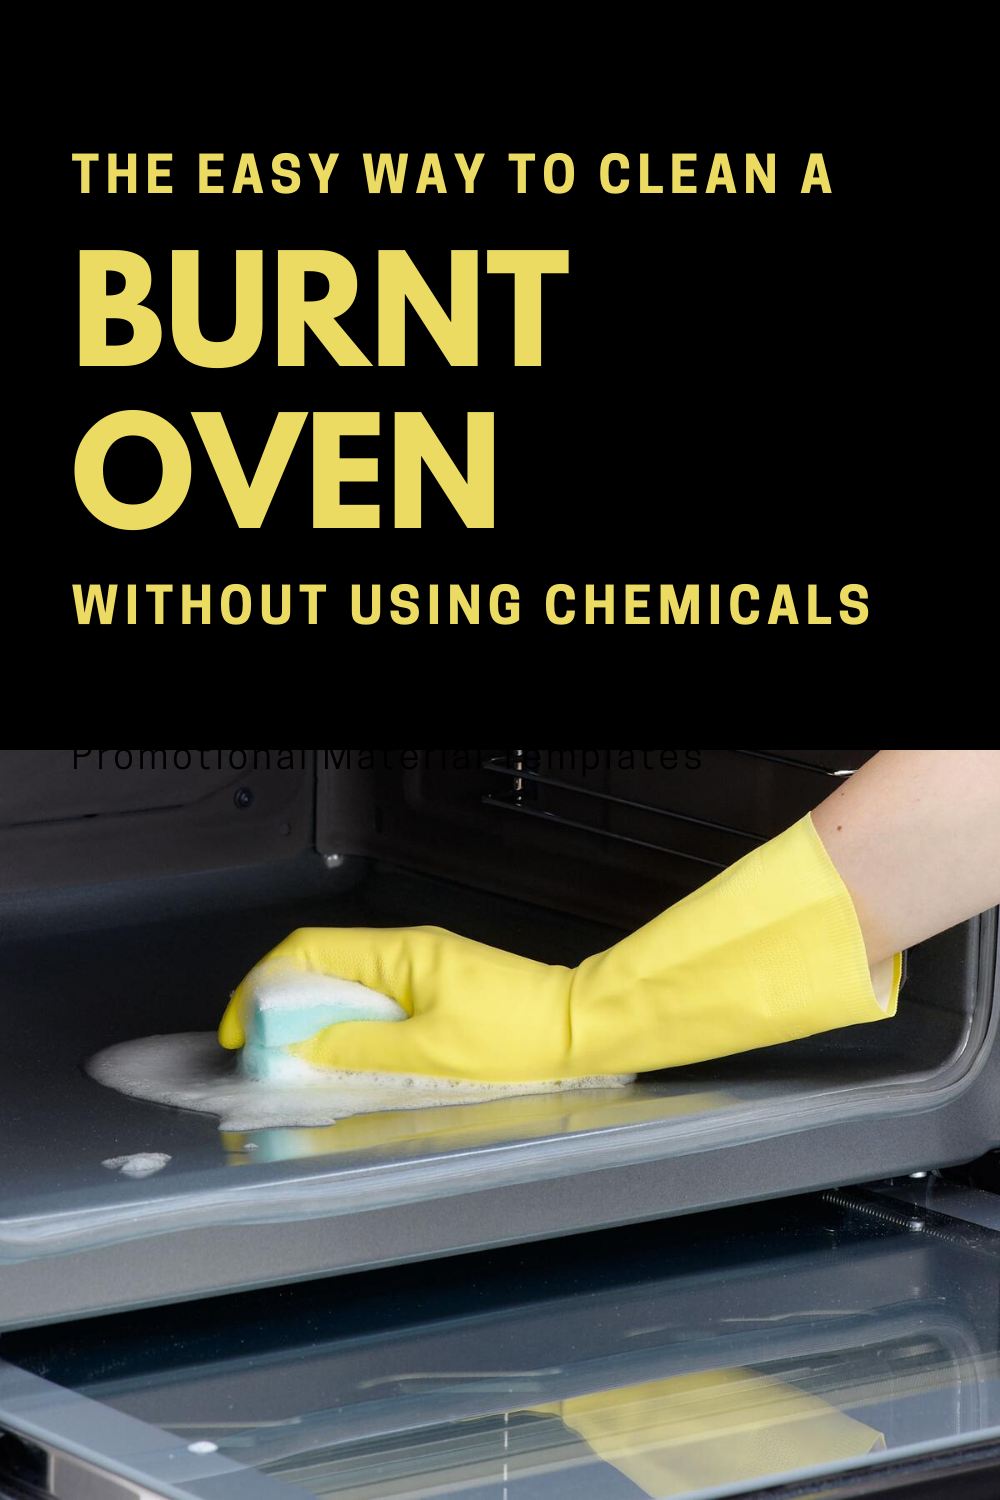 The Easy Way To Clean A Burnt Oven Without Using Chemicals | xCleaning